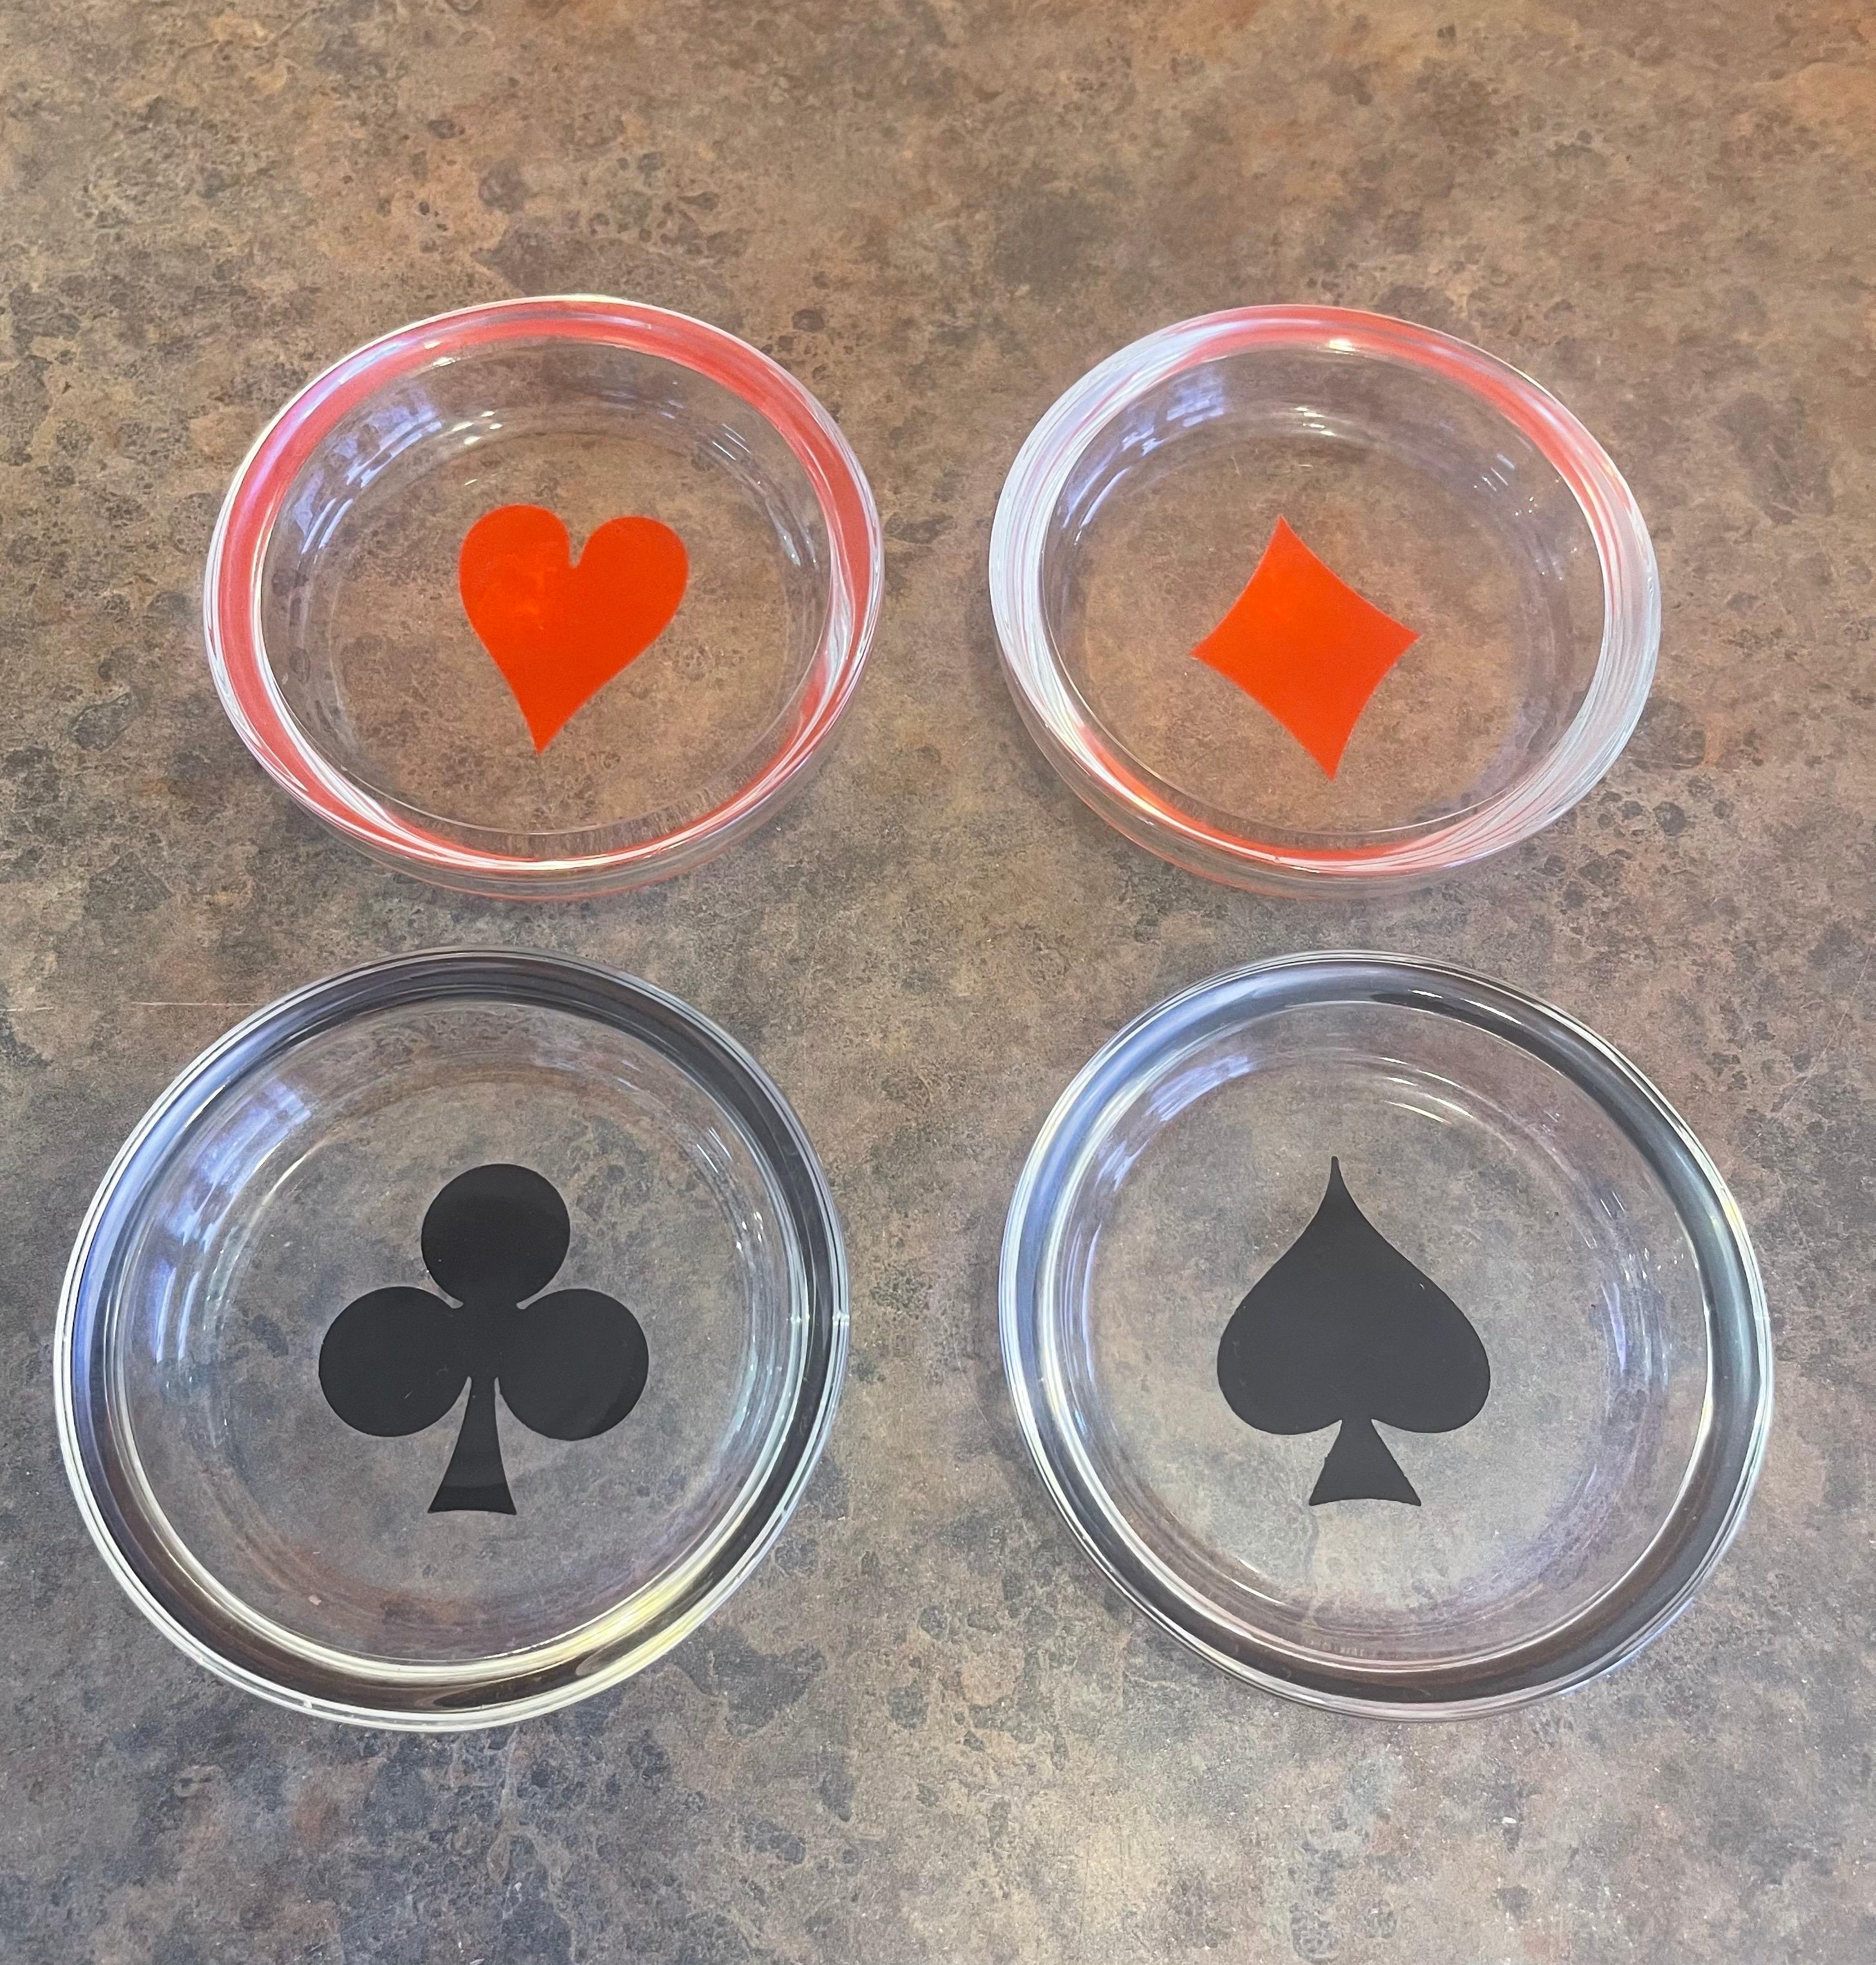 Box Set of Four MCM Poker / Cards Glass Coasters or Ashtrays by Federal Glass Co 2